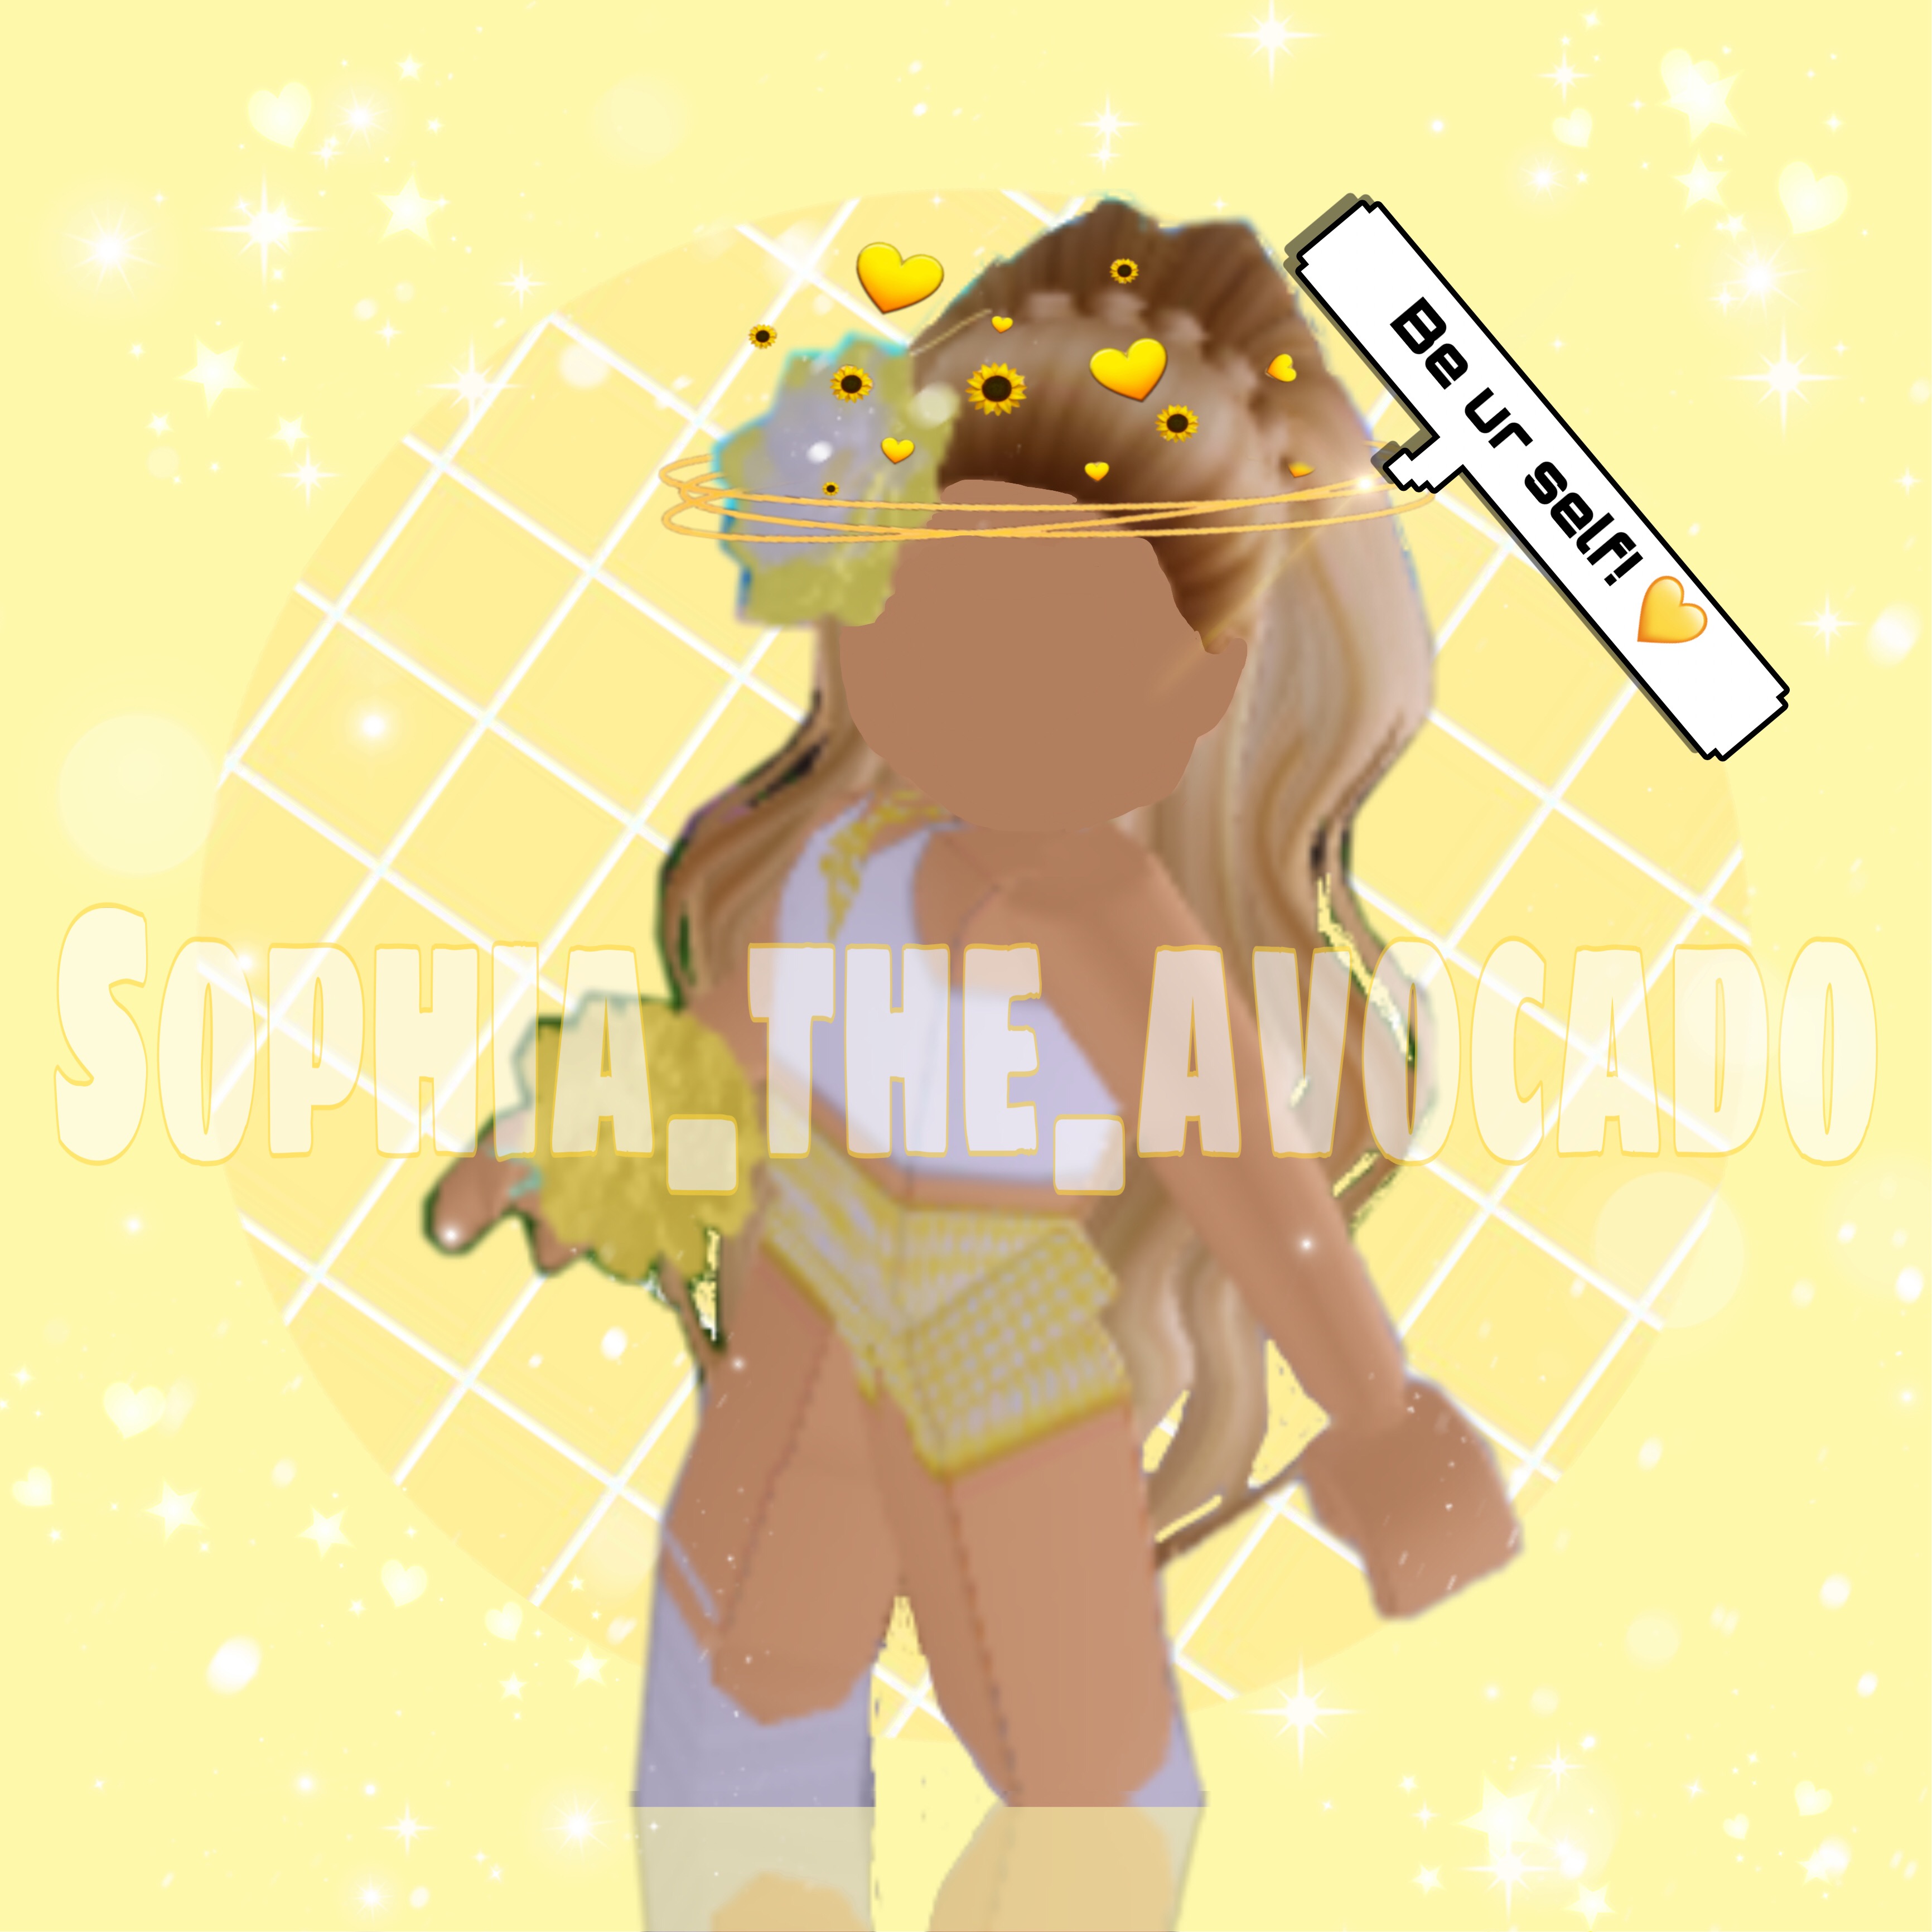 Yellow Aesthetic Gfx Roblox Coolest Free Avatar Roblox - make you an aesthetic minimalist roblox gfx by wowffled